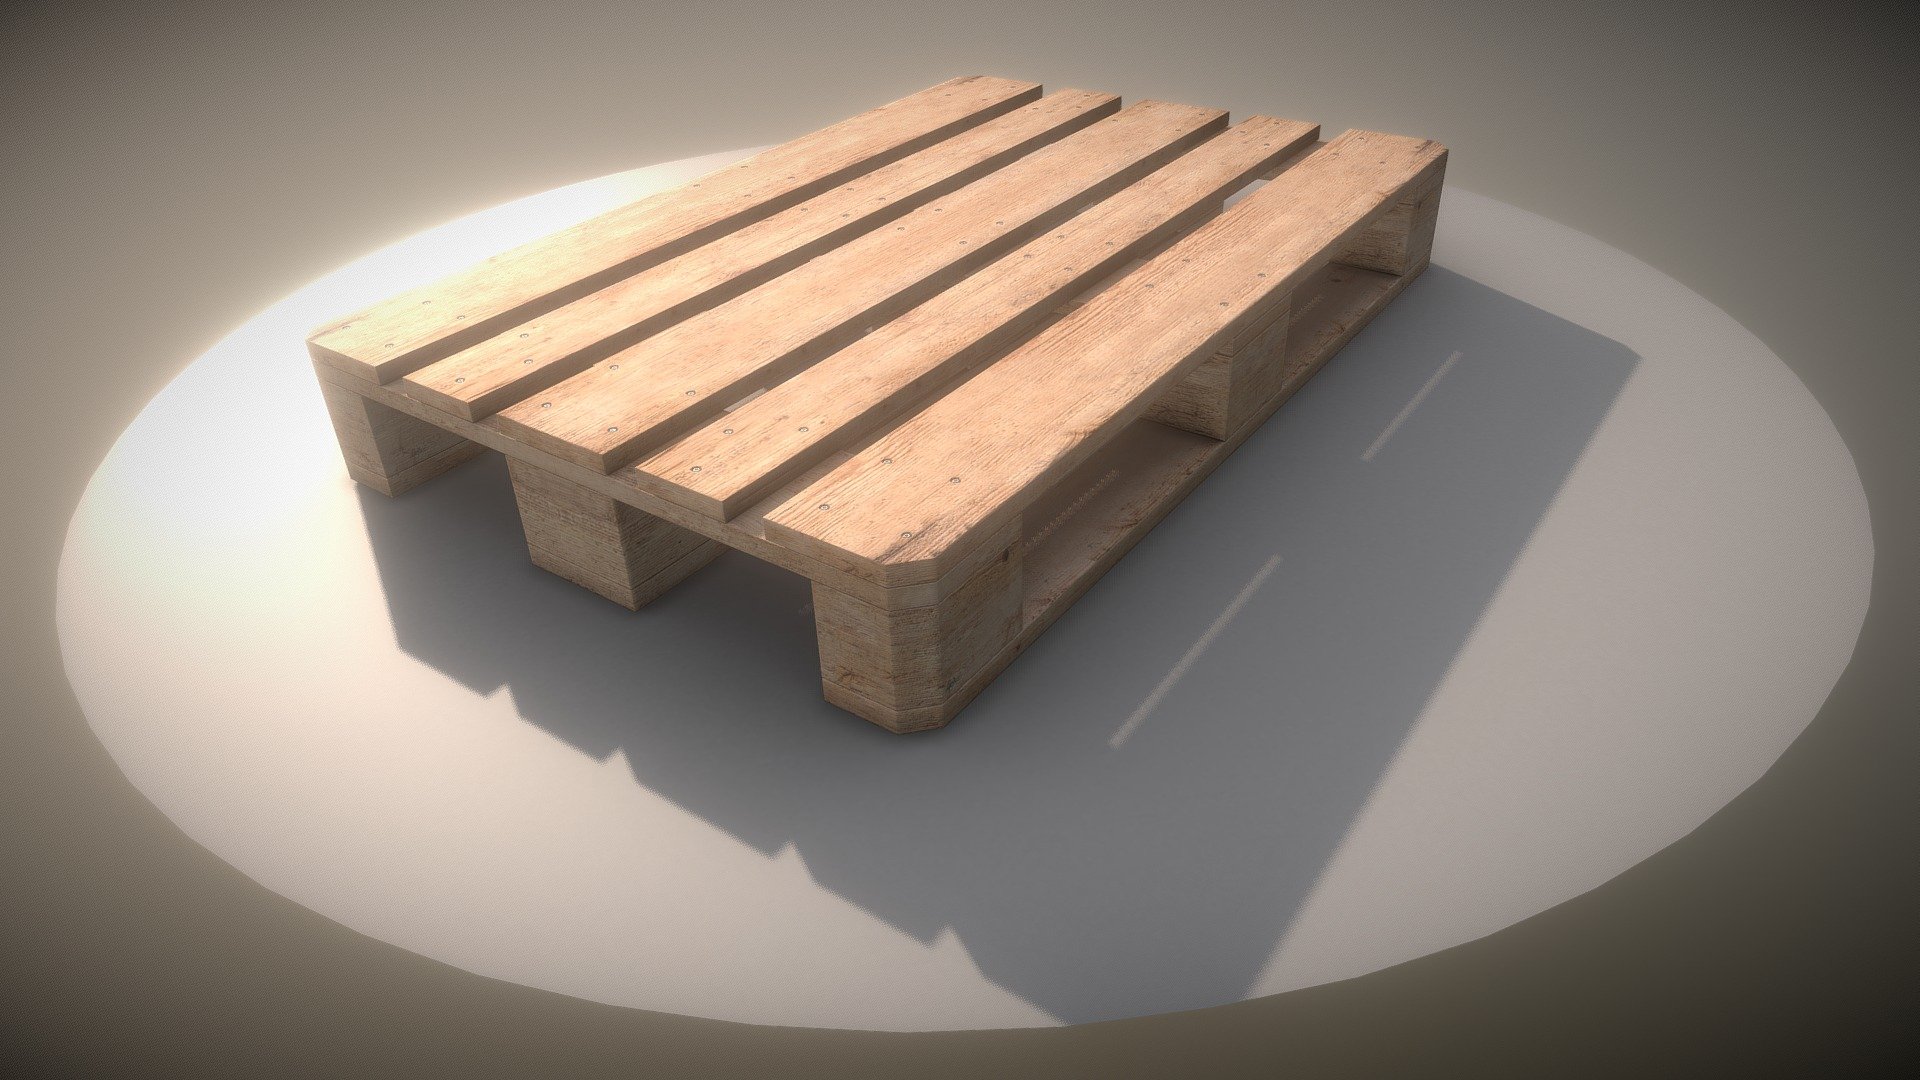 A EUR wood pallet with textures in 4096 x 4096 resolution.





Used software and 3d-model creator.

Here on Sketchfab you can see or purchase some of our 3d-models which we are using in our projects for our software VIS-All-3D.

This 3d model or those 3d models as well as the textures were created by 3DHaupt for the software service John GmbH

Modeled and textured with Blender 3D - EUR Wood Pallet | High-Poly Version - Buy Royalty Free 3D model by VIS-All-3D (@VIS-All) 3d model